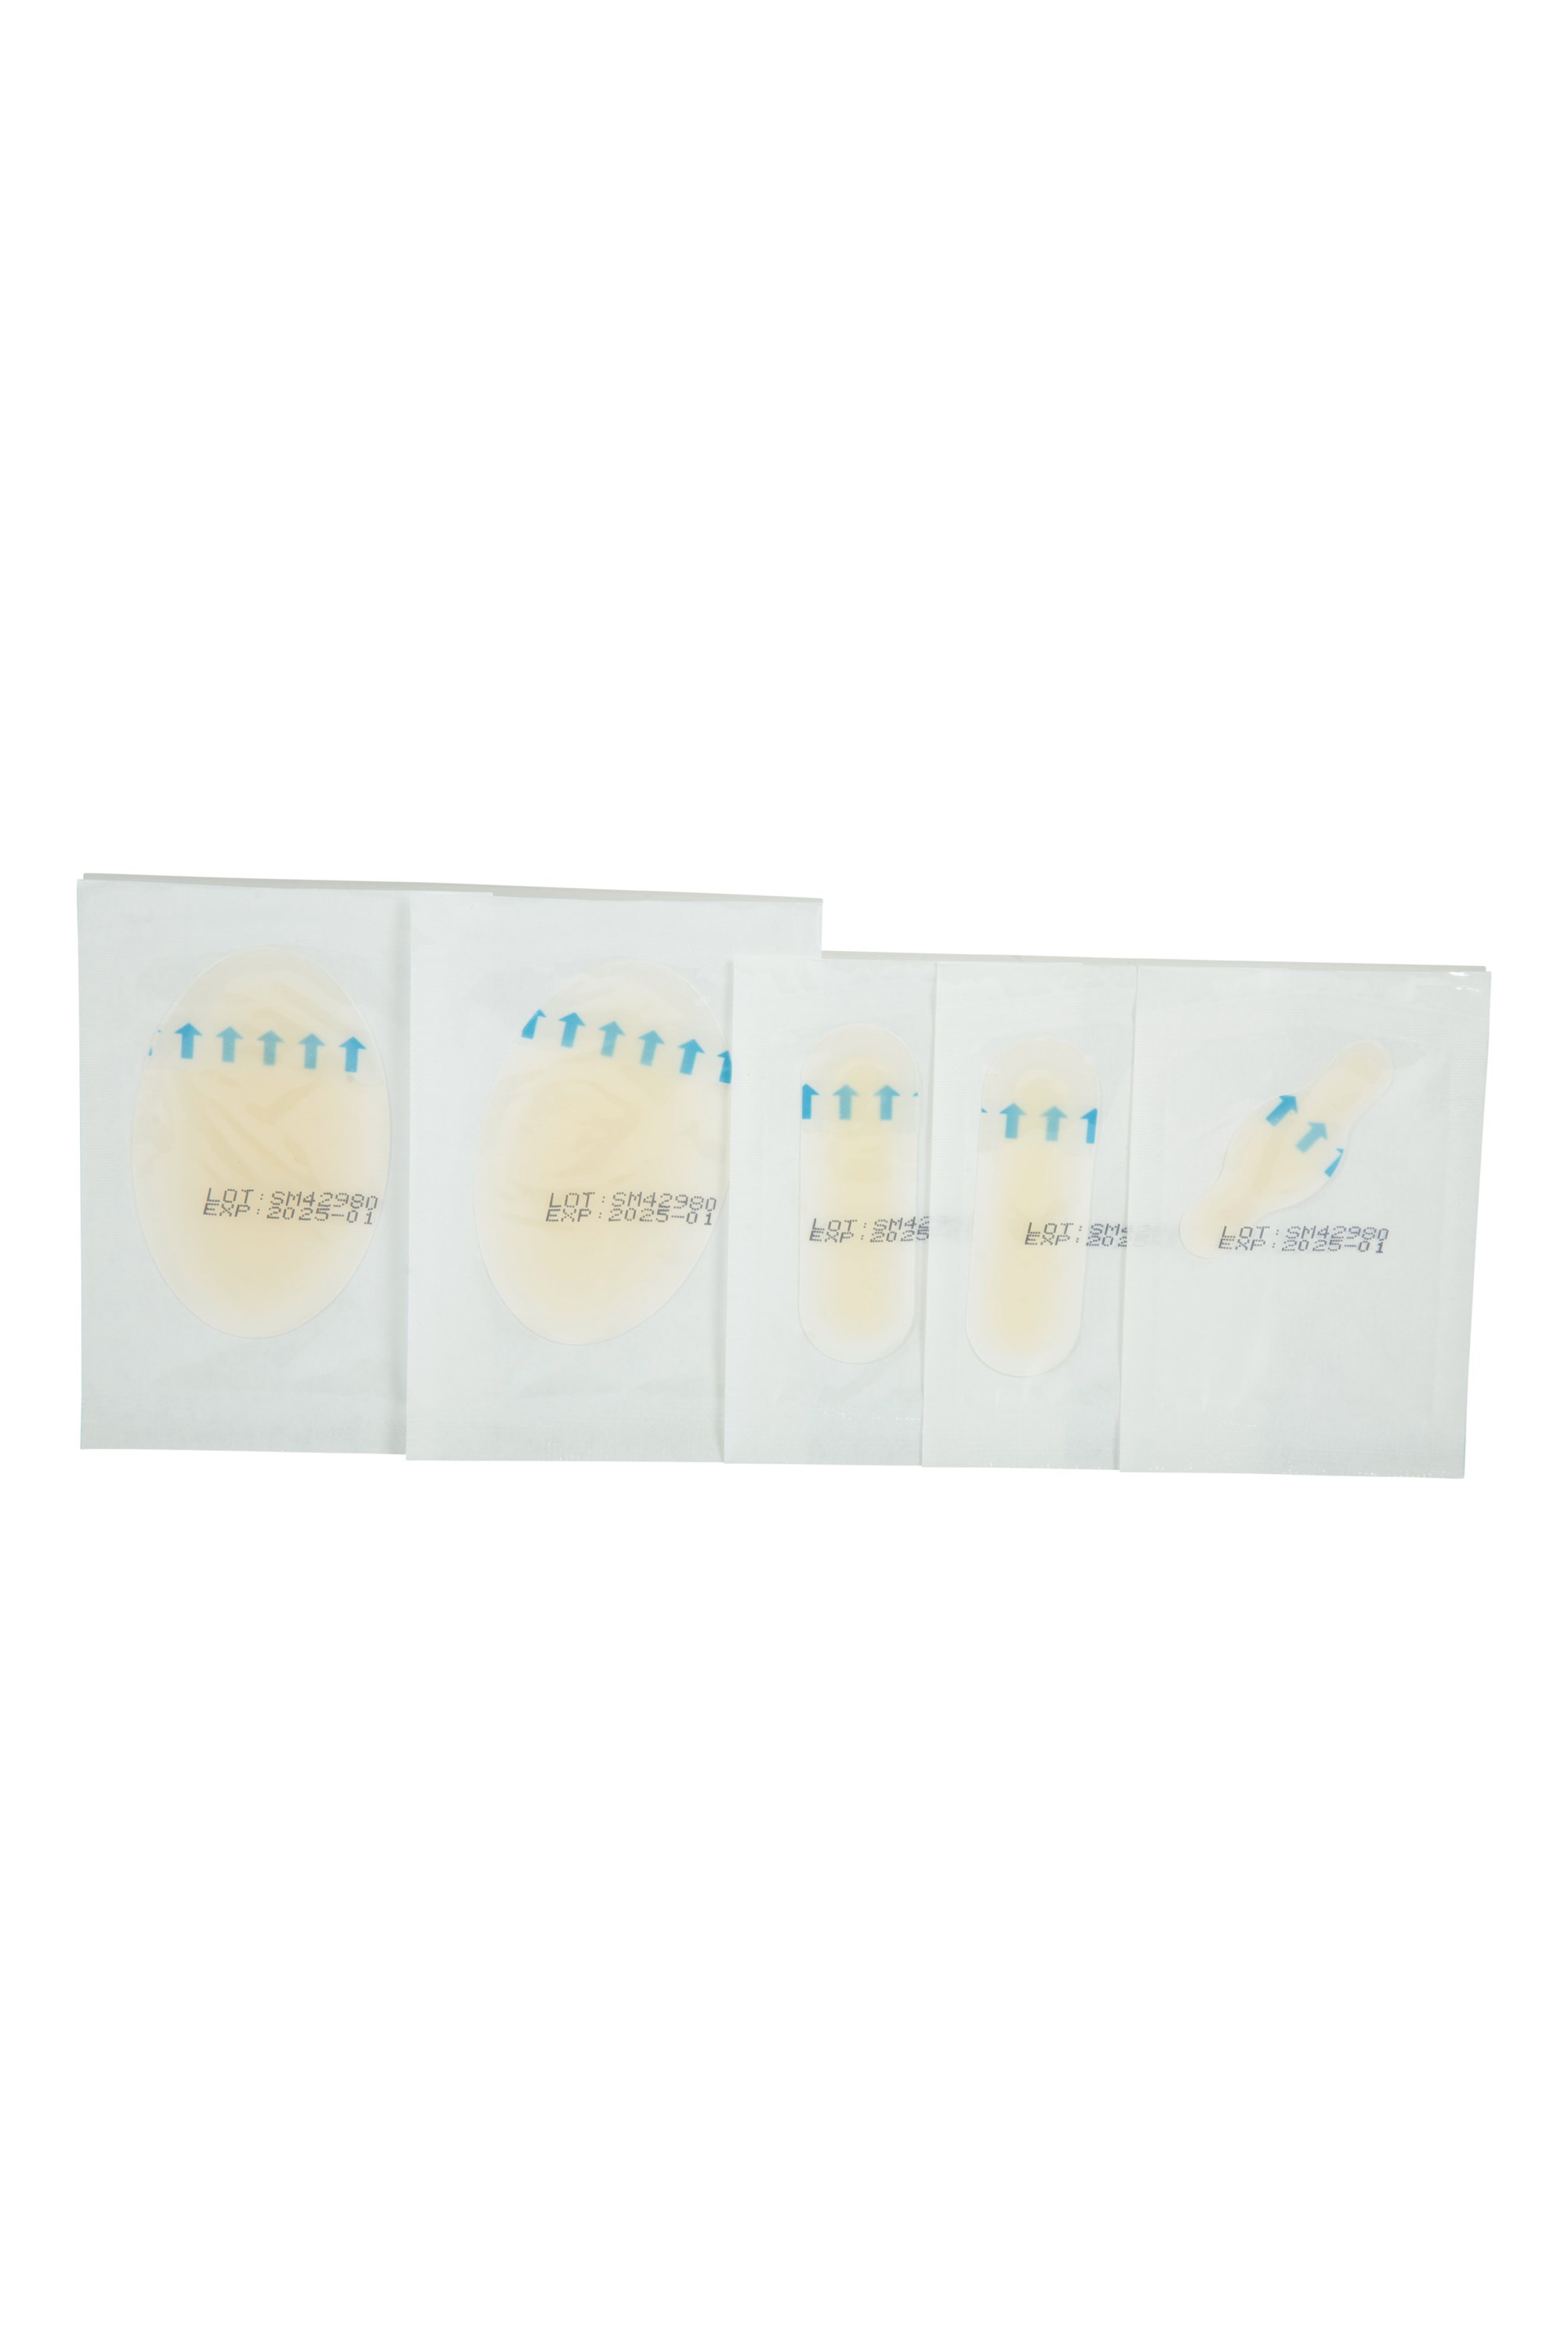 Blister Plaster Set - 5 Pieces - ONE